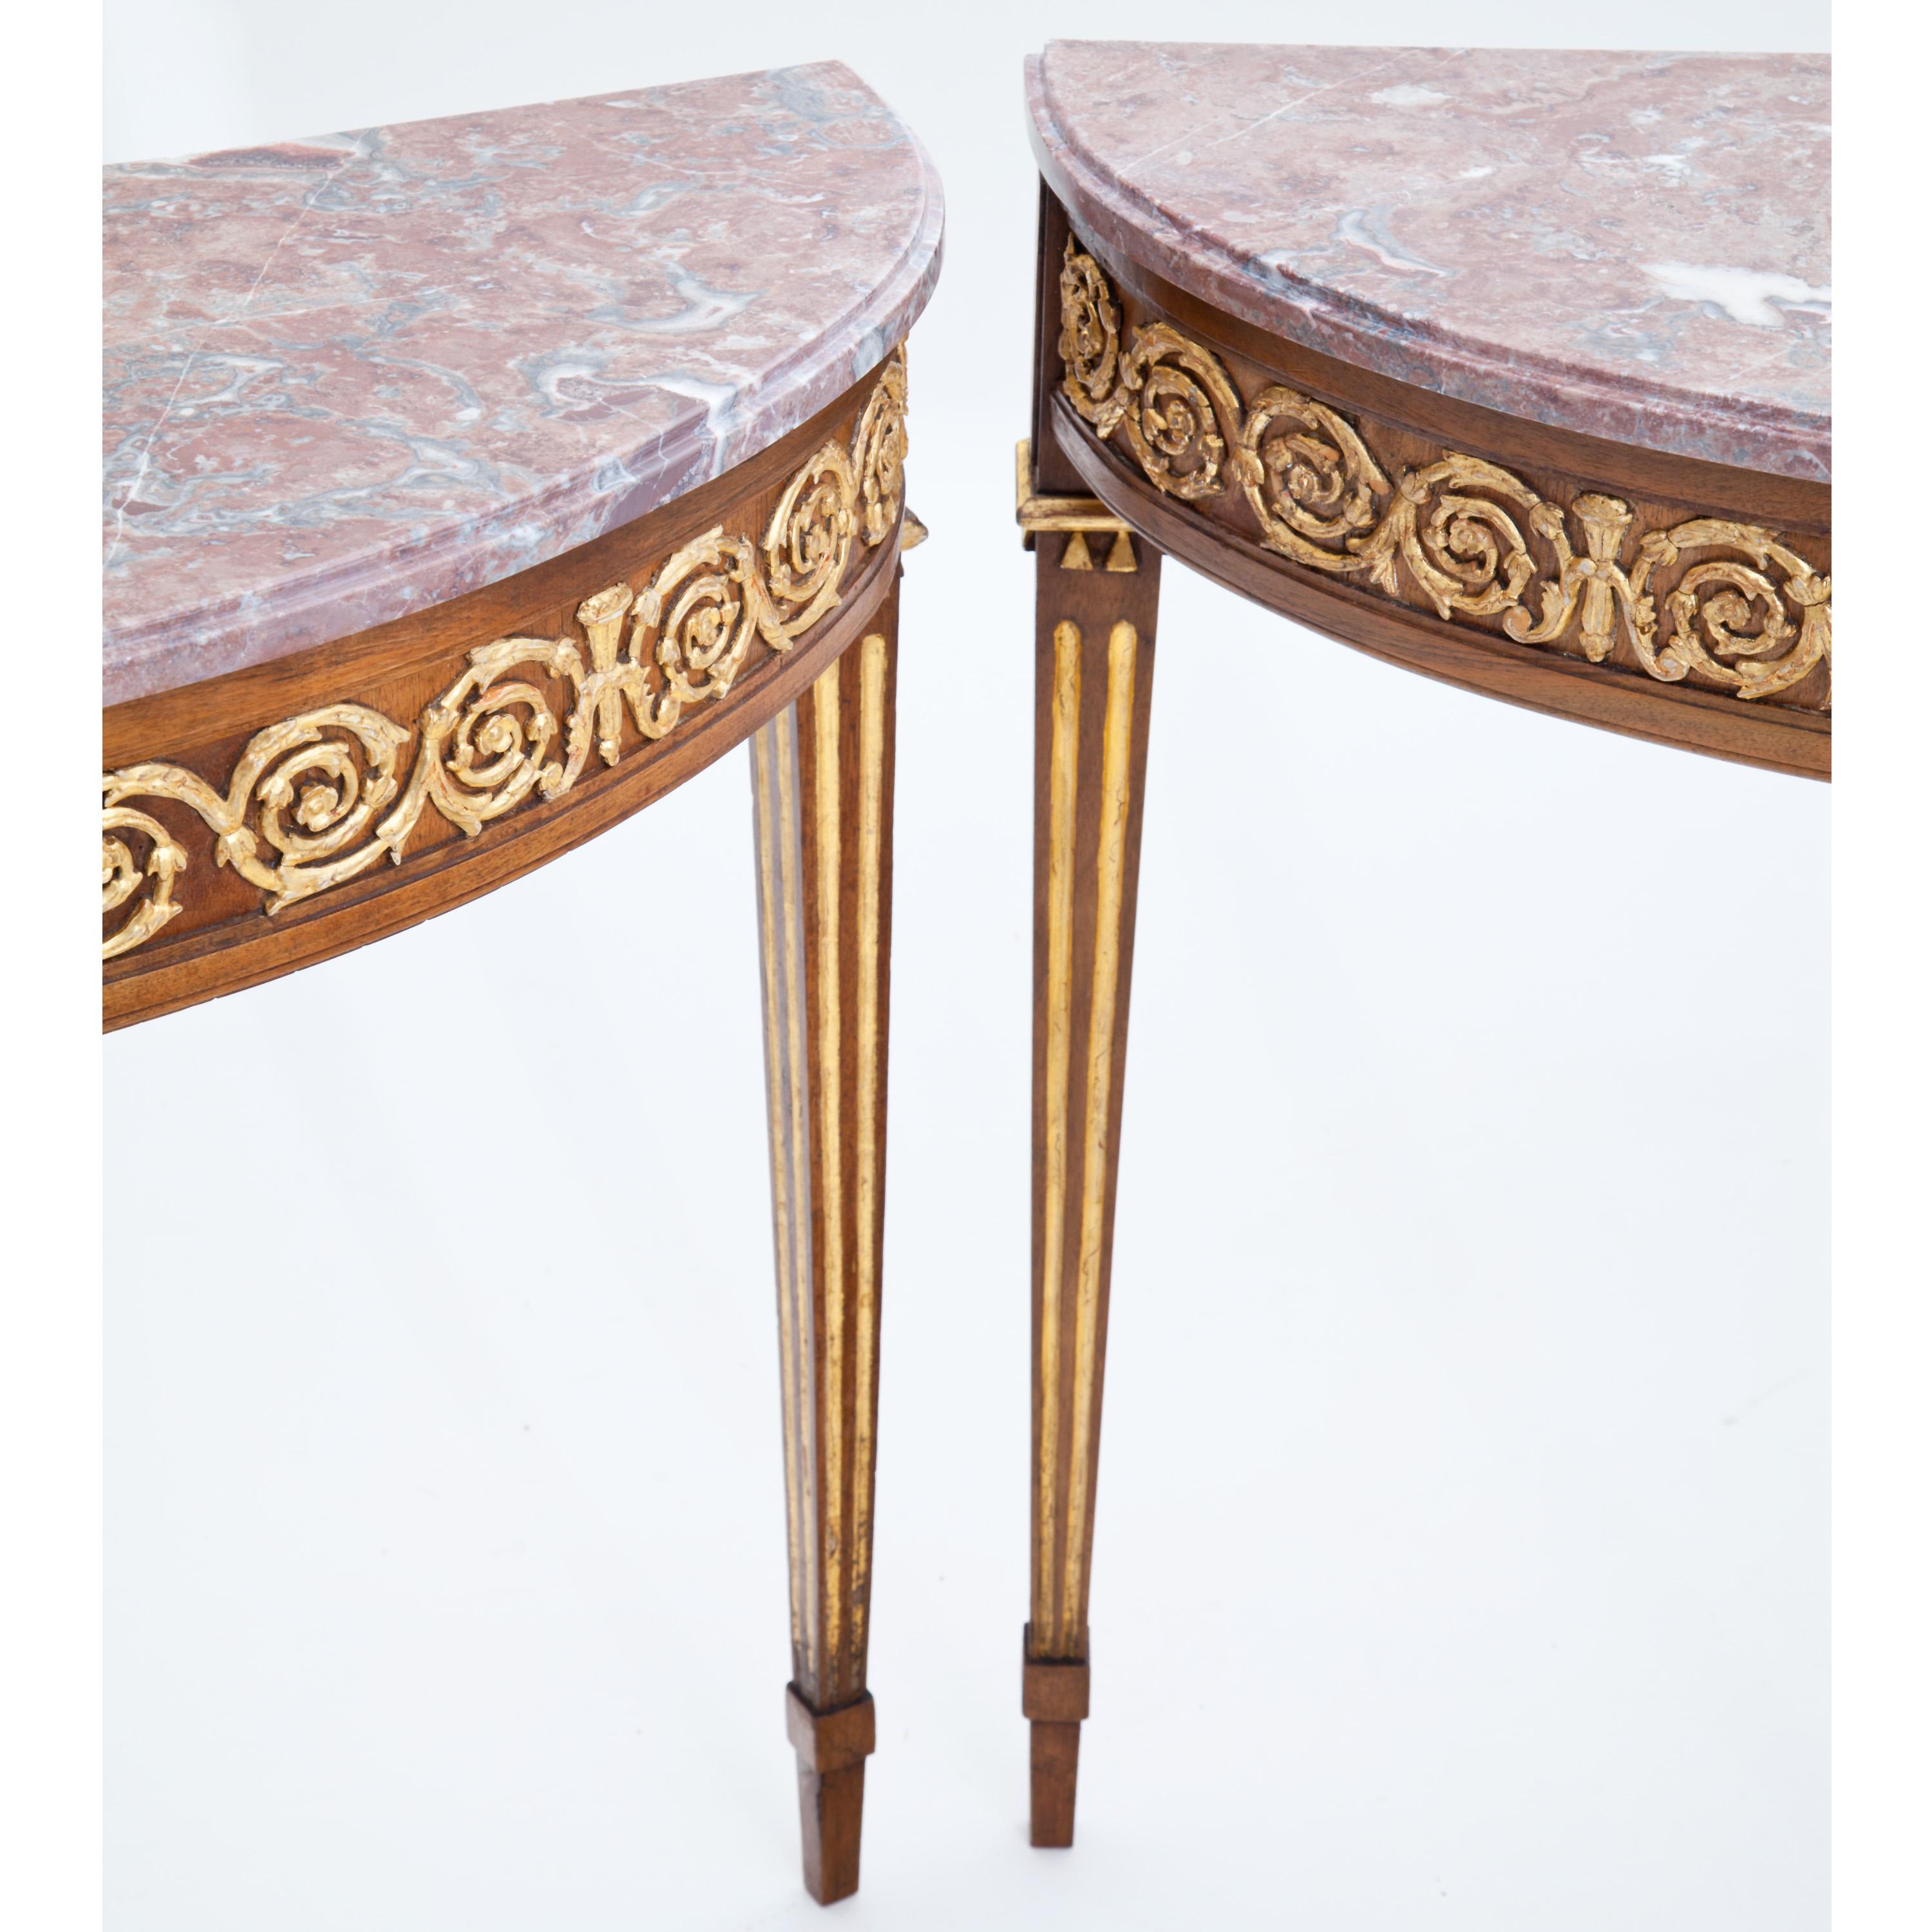 18th Century and Earlier Pair of Redesigned 18th Century Demilune Consoles with Marble Tops 21st Century